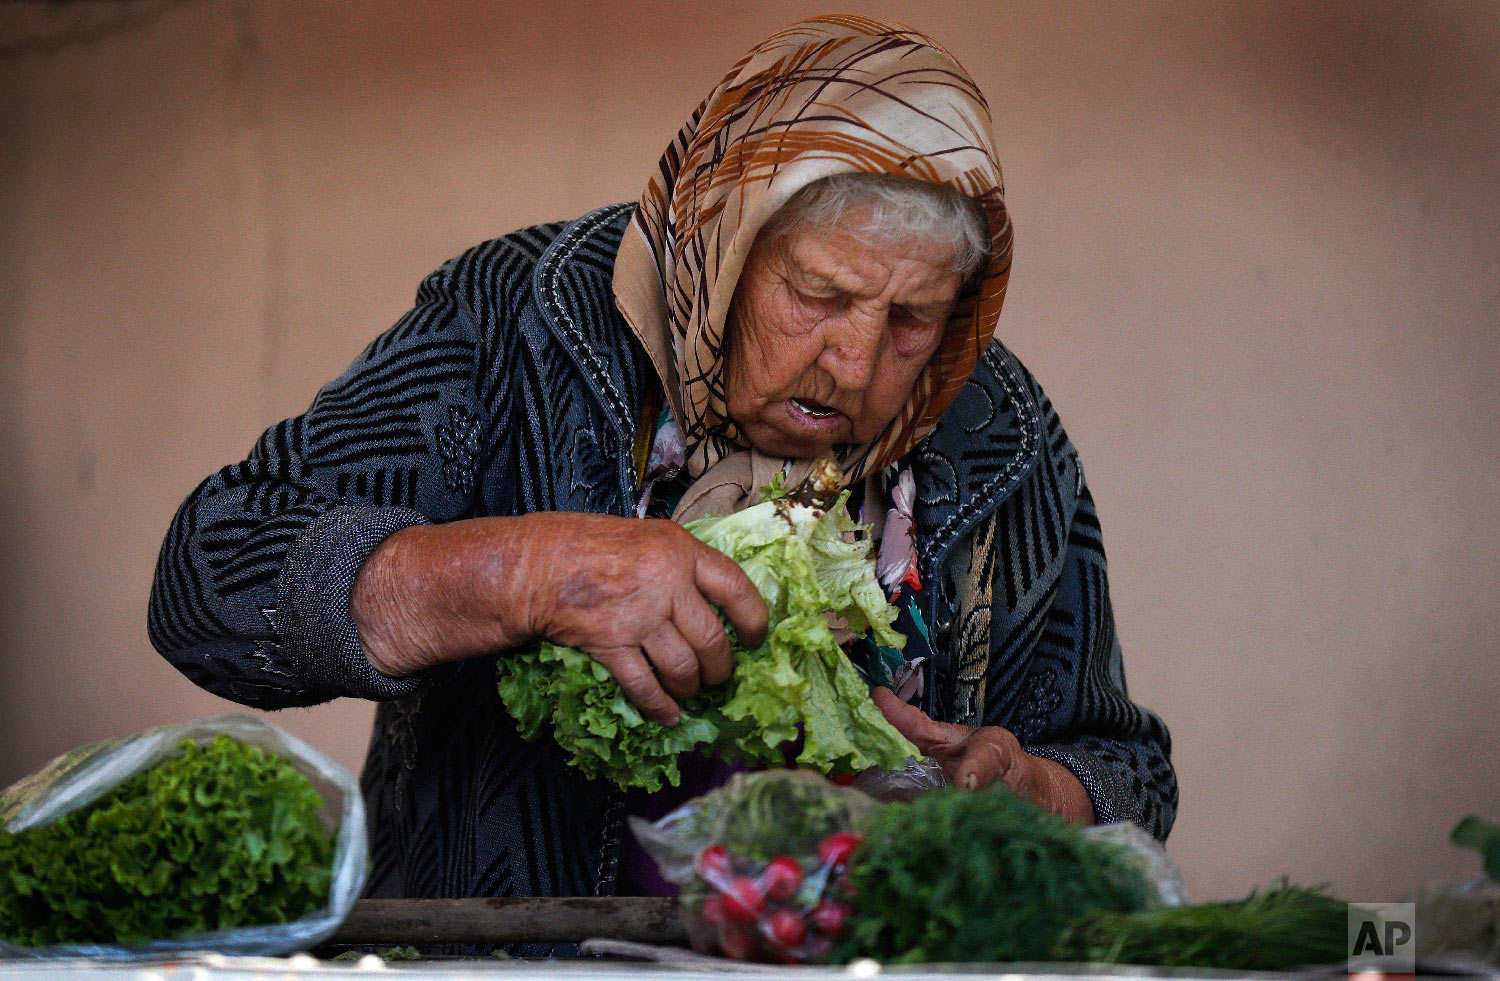  A woman prepares salad for sale on a local food market during the 2018 soccer World Cup in Kazan, Russia on June 29, 2018 (AP Photo/Frank Augstein) 